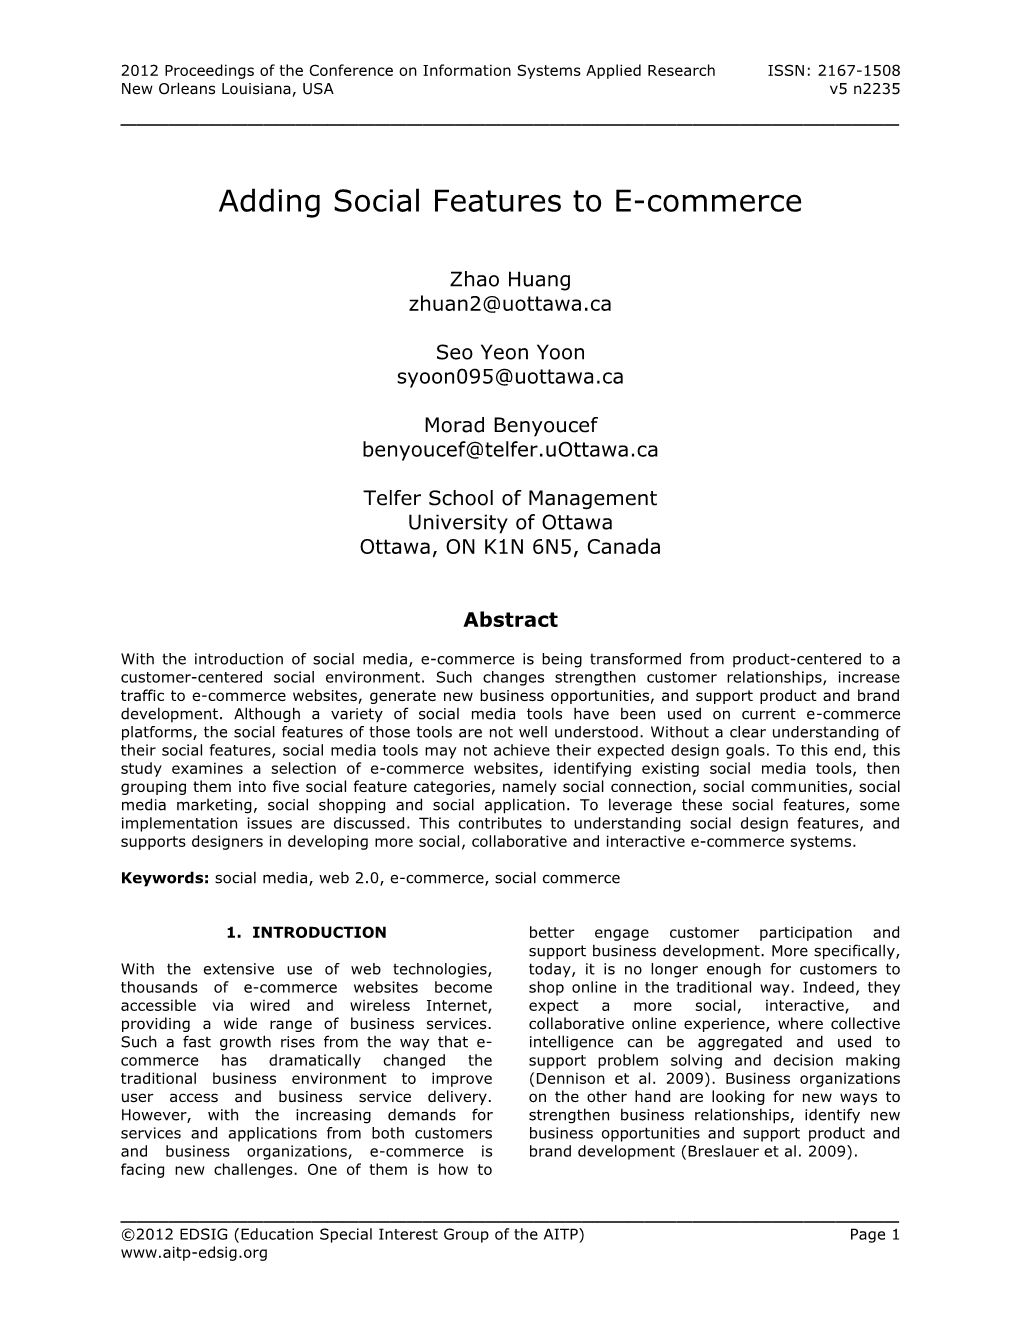 Adding Social Features to E-Commerce